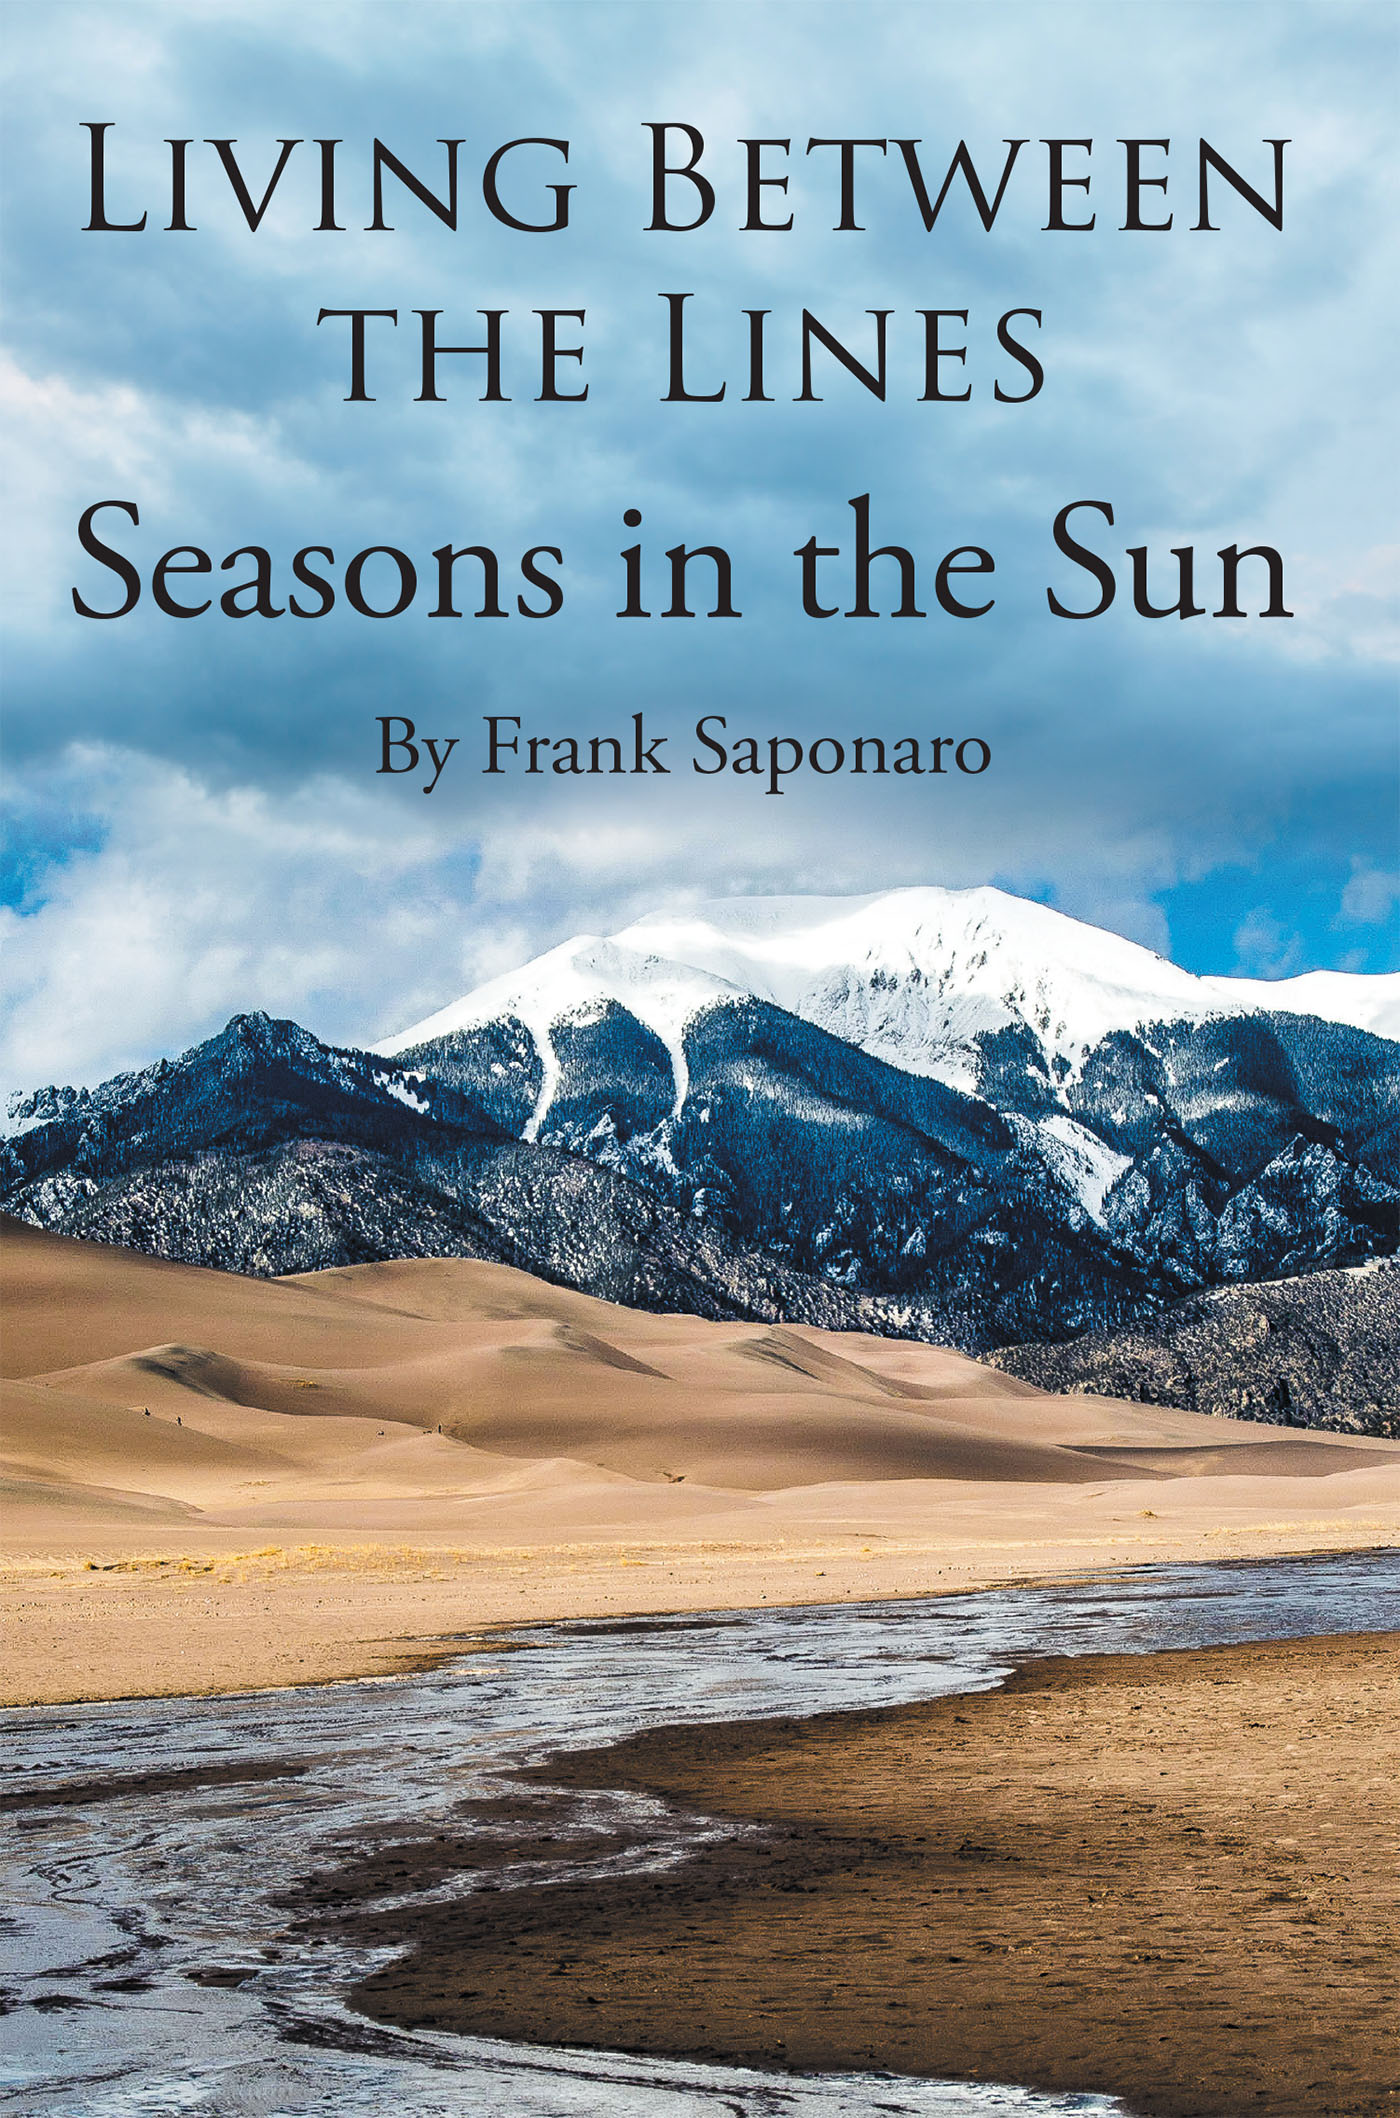 Author Frank Saponaro’s New Book, "Living Between the Lines: Seasons in the Sun," is the Fascinating Continuation of Kenny’s Captivating and Ever-Evolving Story